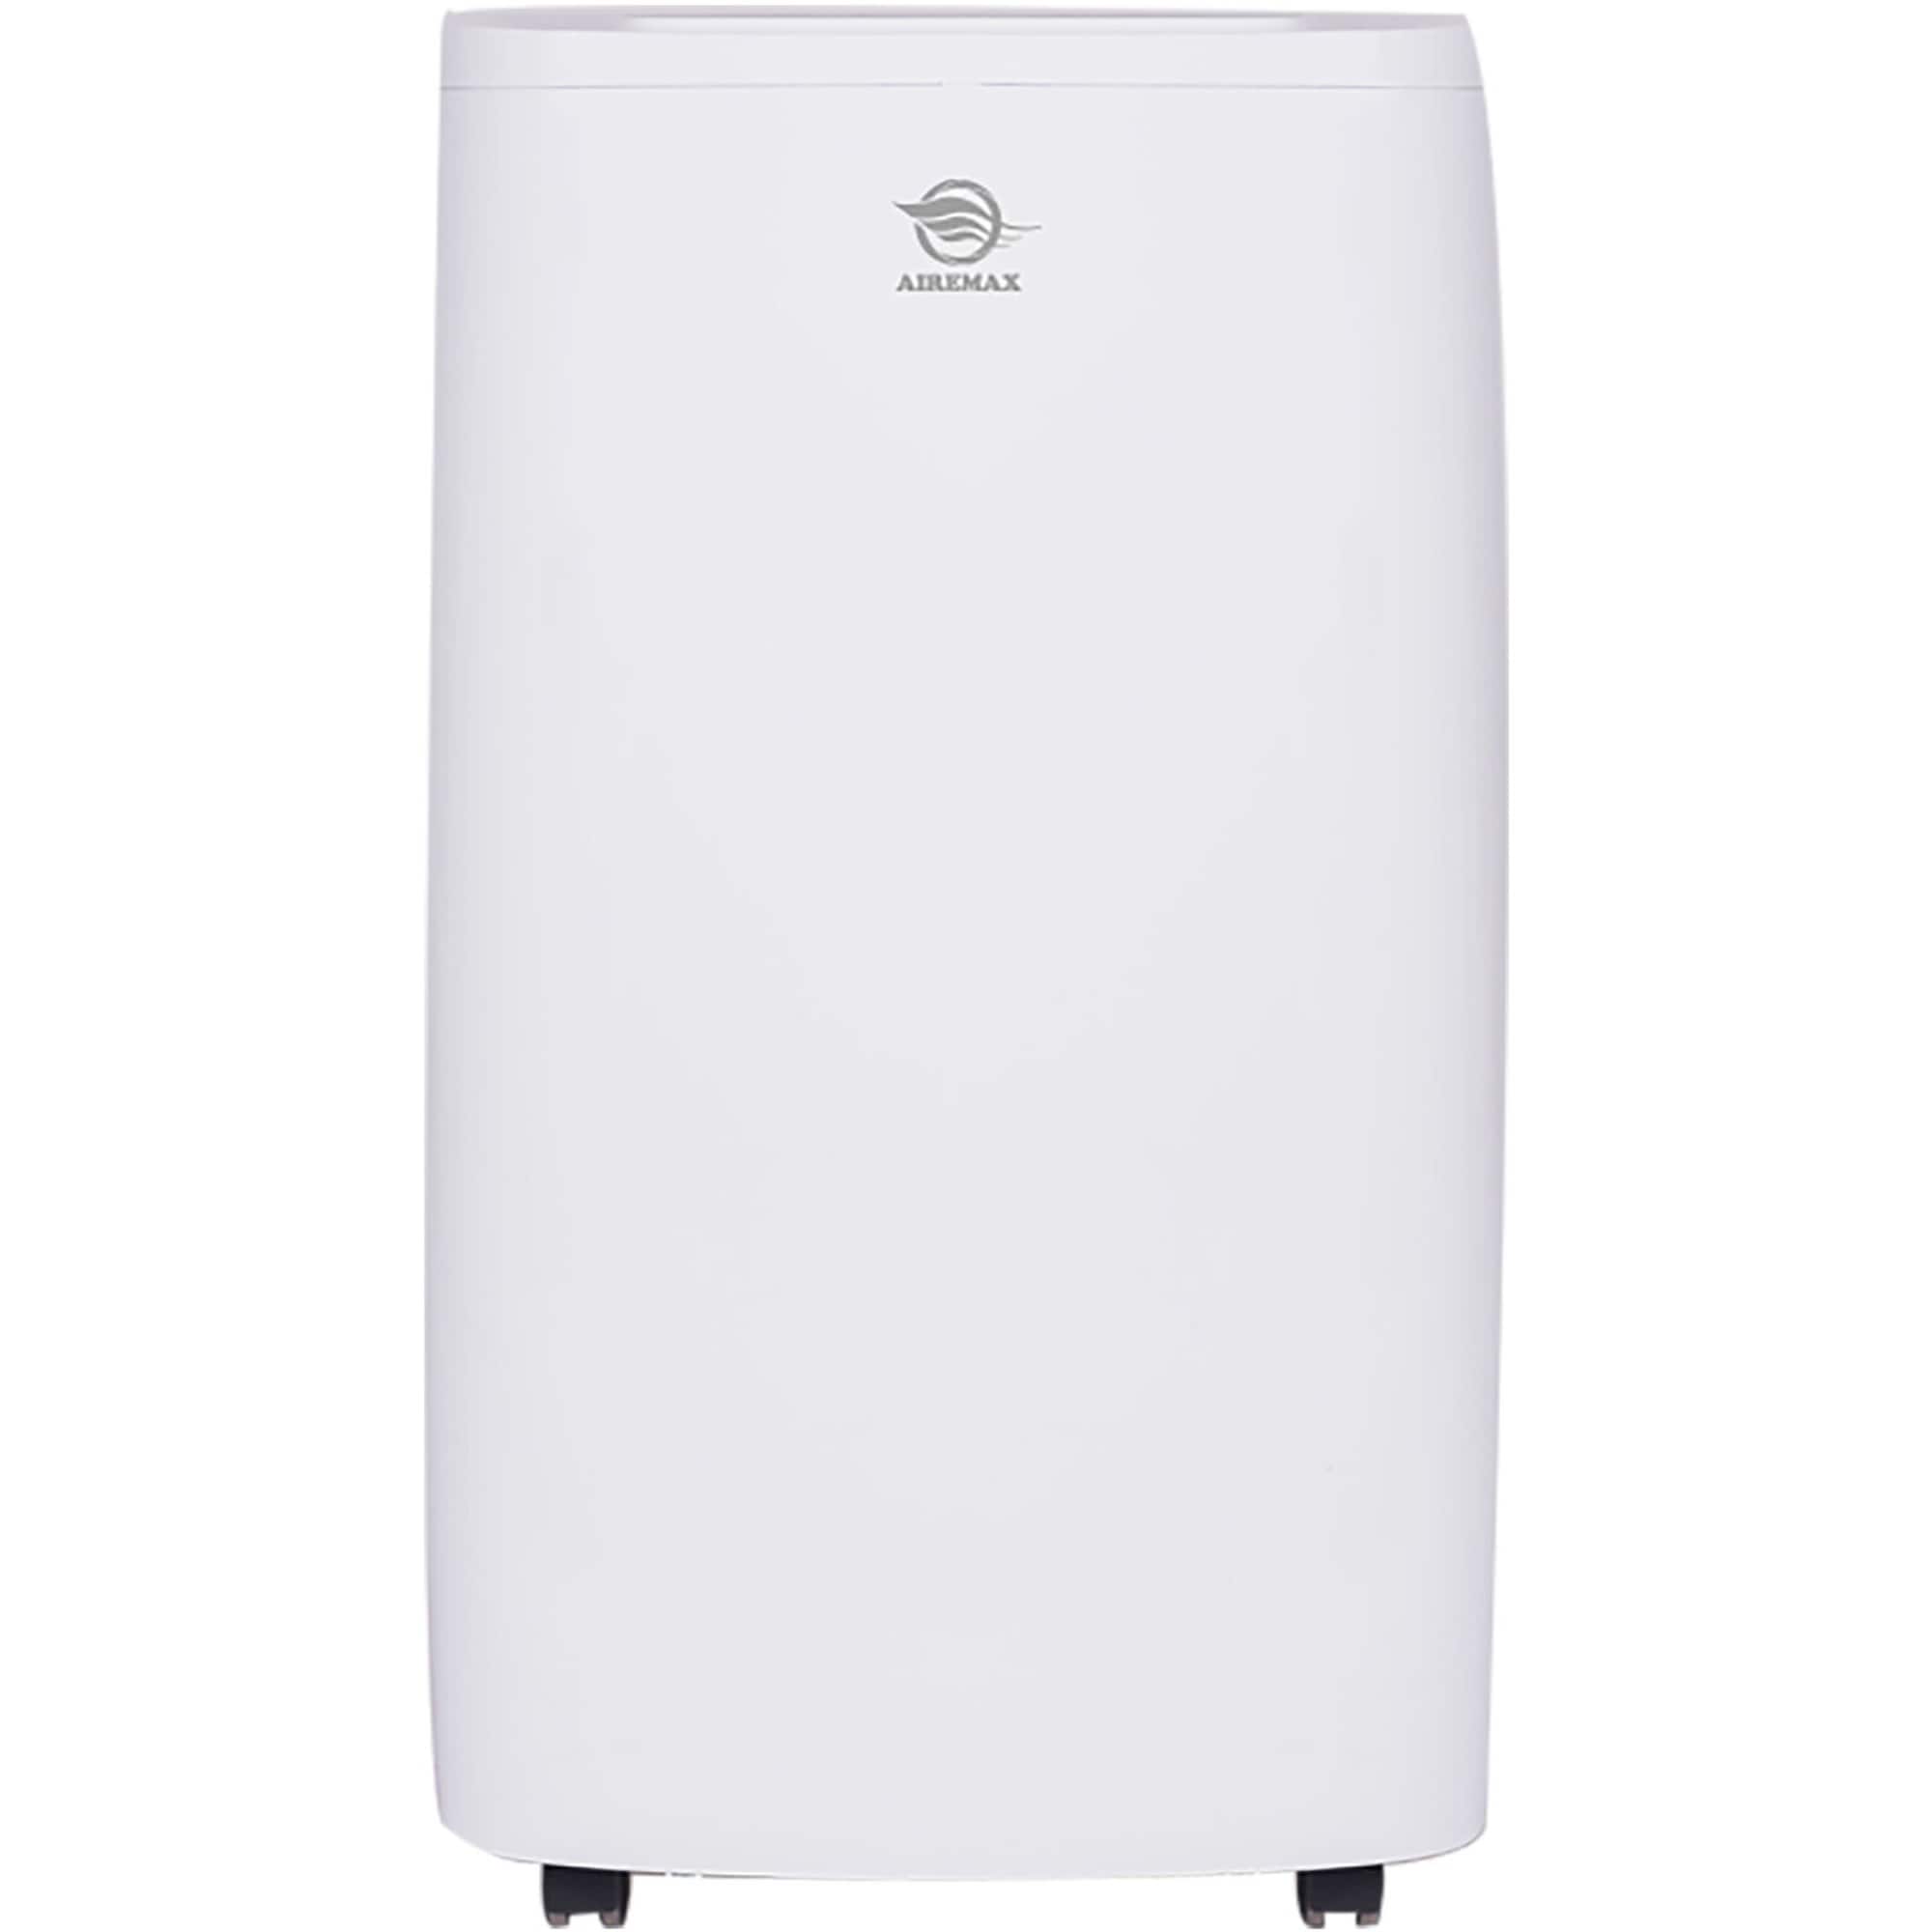  BLACK+DECKER 10,000 BTU Portable Air Conditioner up to 450 Sq.  ft. with Remote Control, White : Home & Kitchen